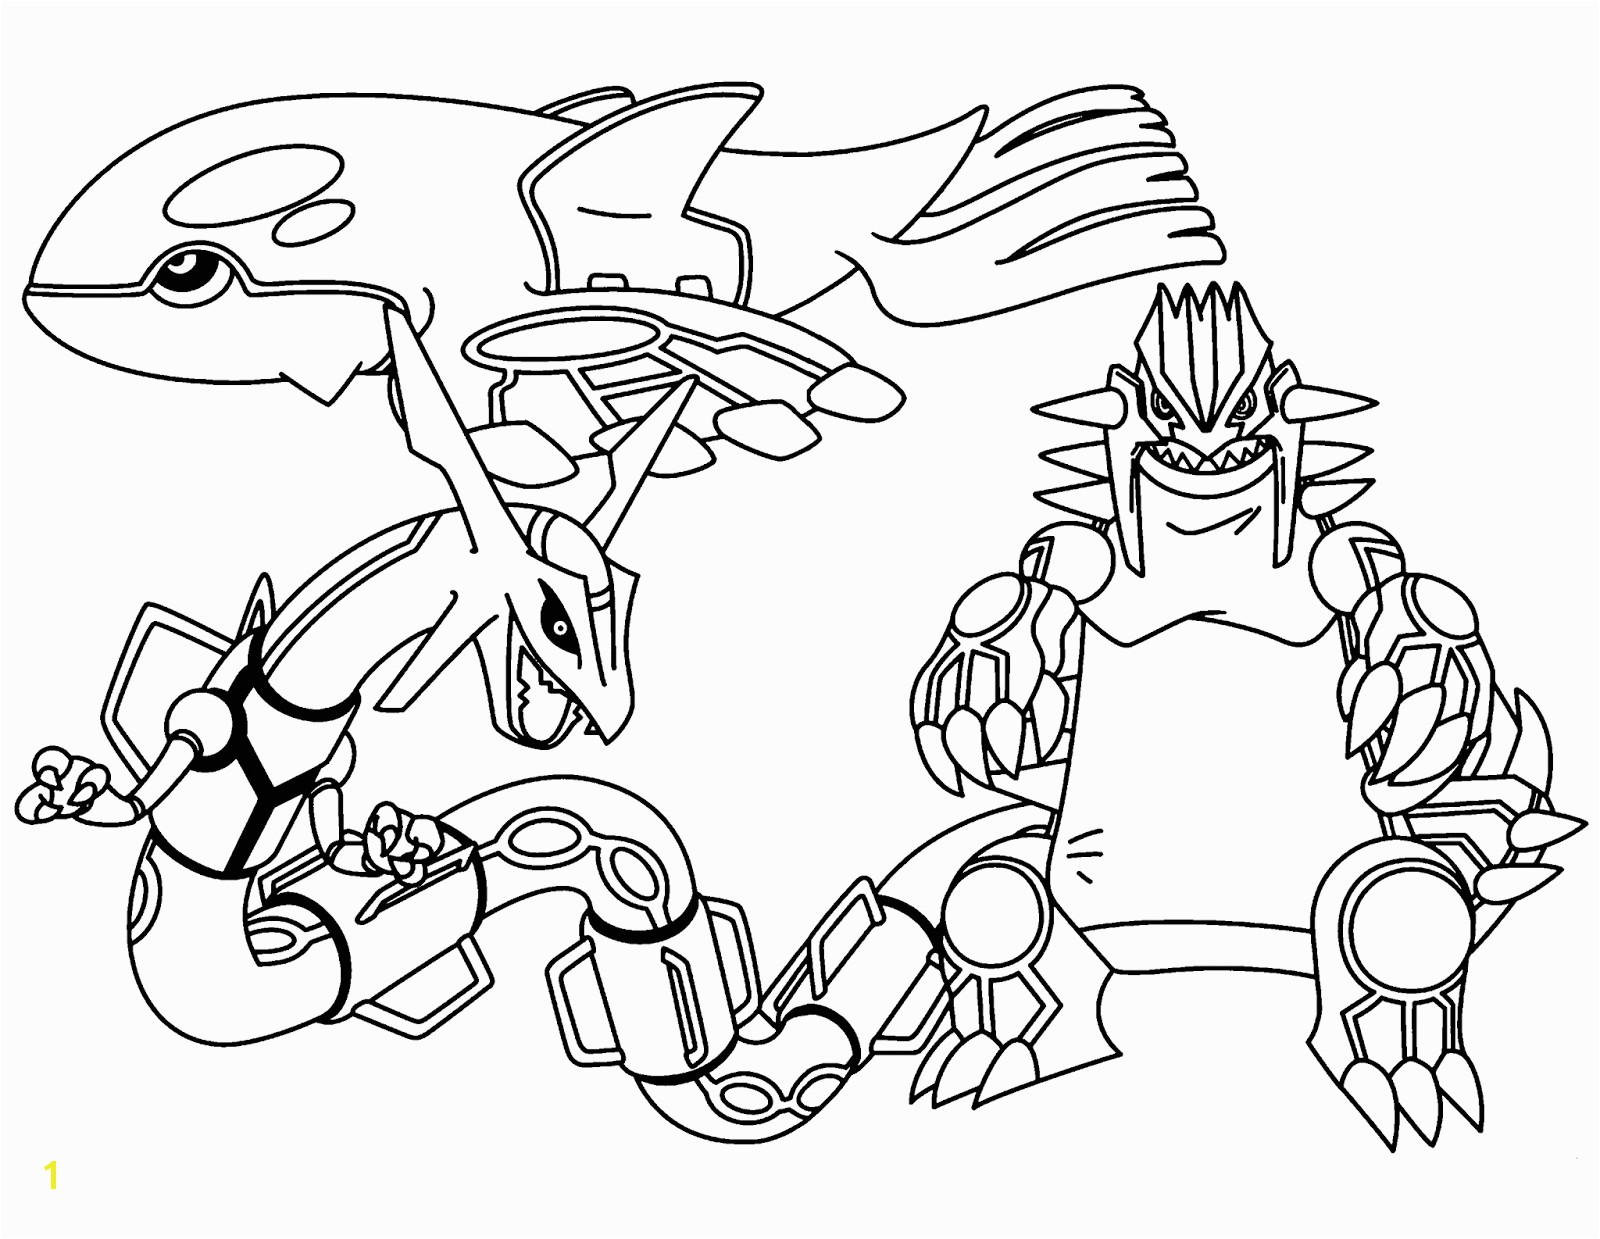 Legendary Pokemon Printable Coloring Pages All Legendary Pokemon Coloring Pages Printable